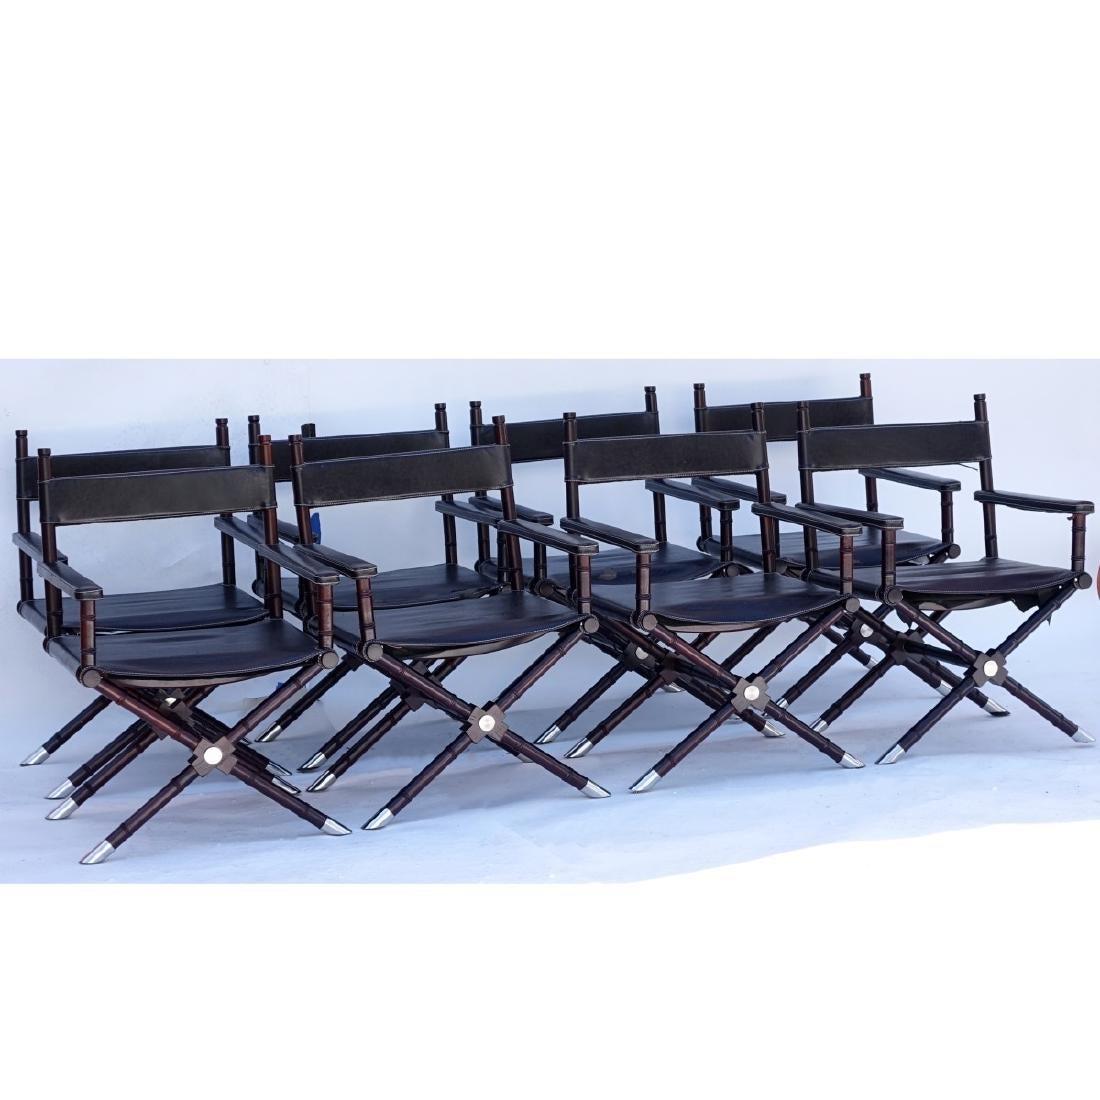 Set of eight (8) Ralph Lauren Director's Chairs. Wooden frame with saddle seat and nickel-plated feet. From the former Jupiter Island, Florida estate of Ms. Celine Dion.